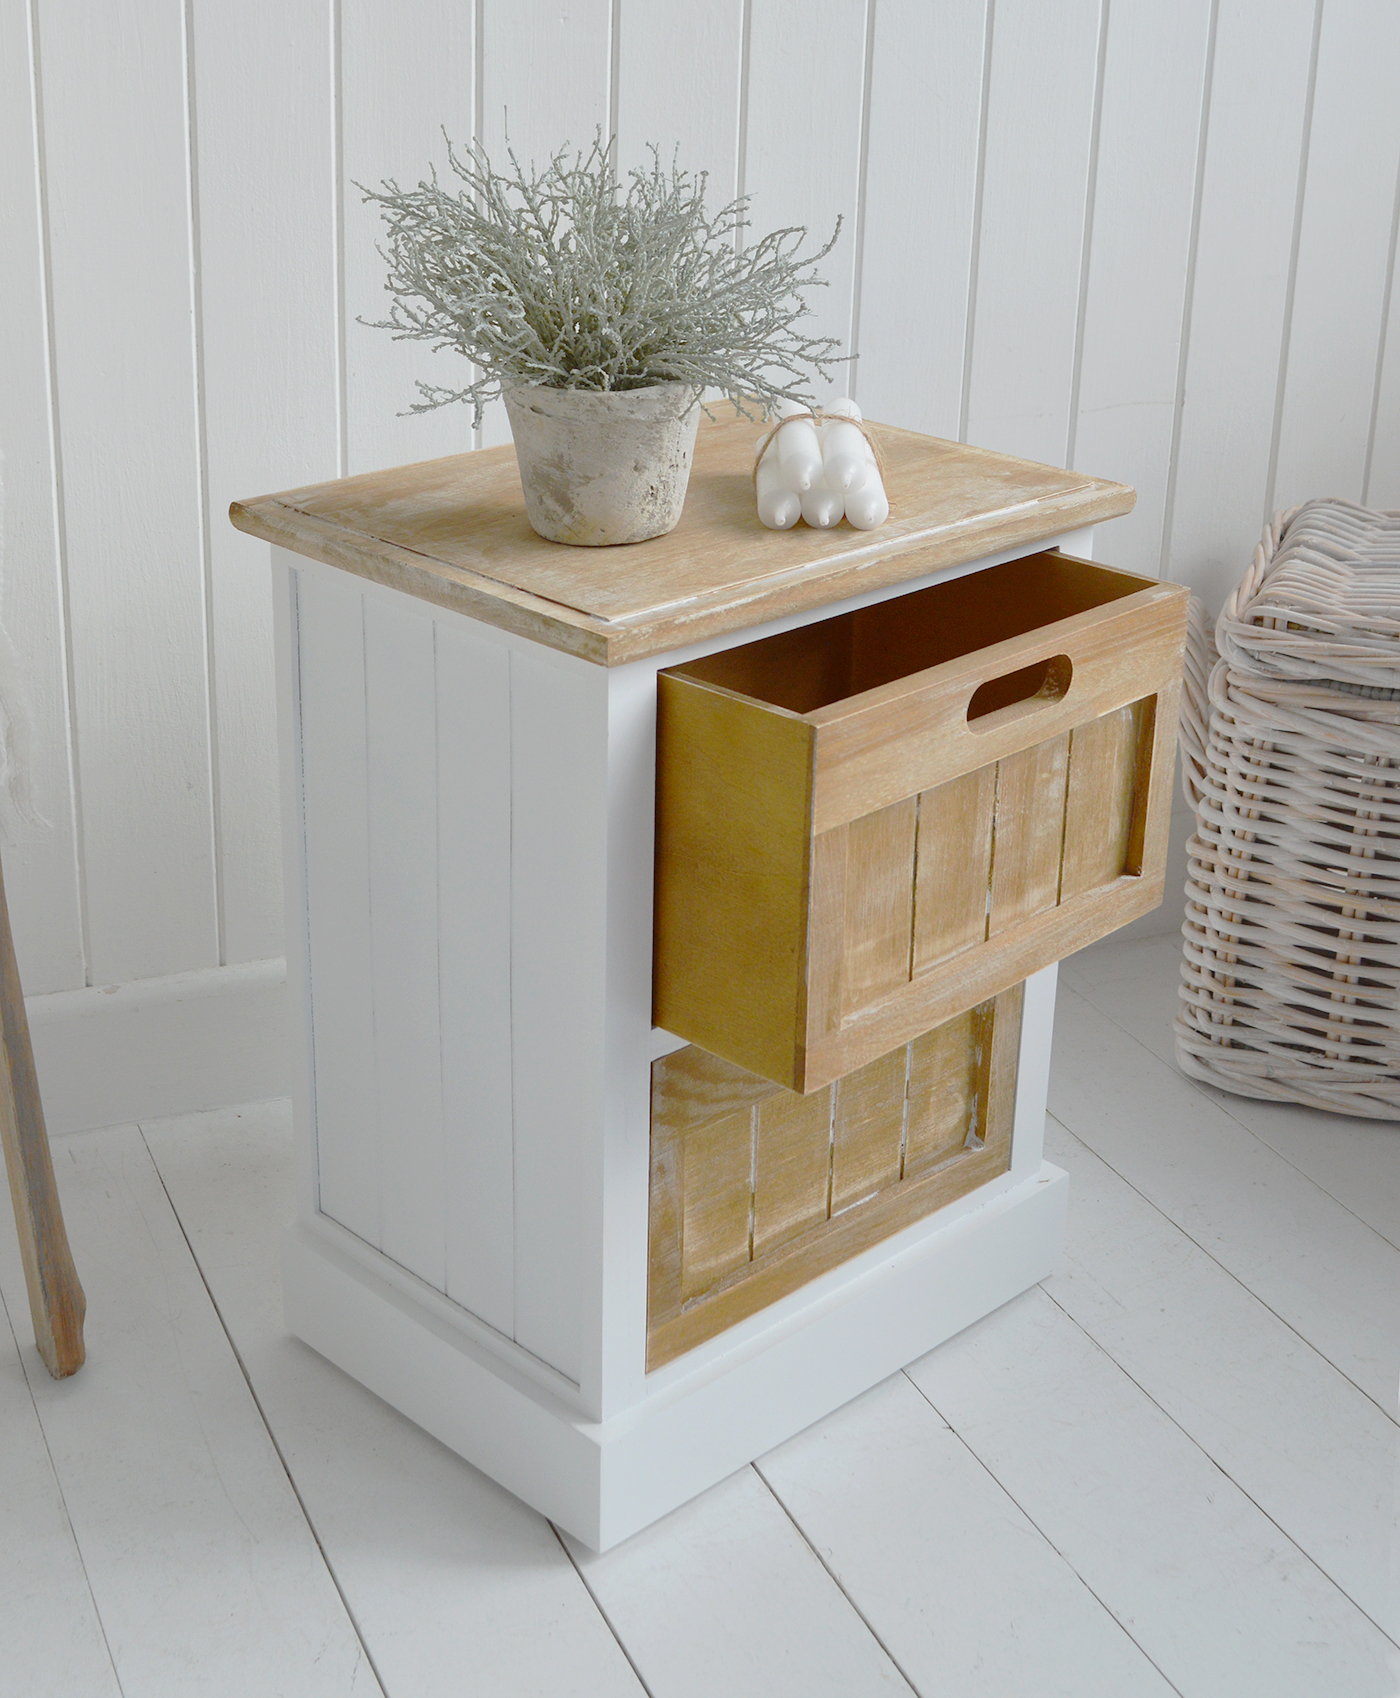 Maine Lamp white table - 2 drawers for storage in the living room or bedroom of coastal amd modern country homes and interiors